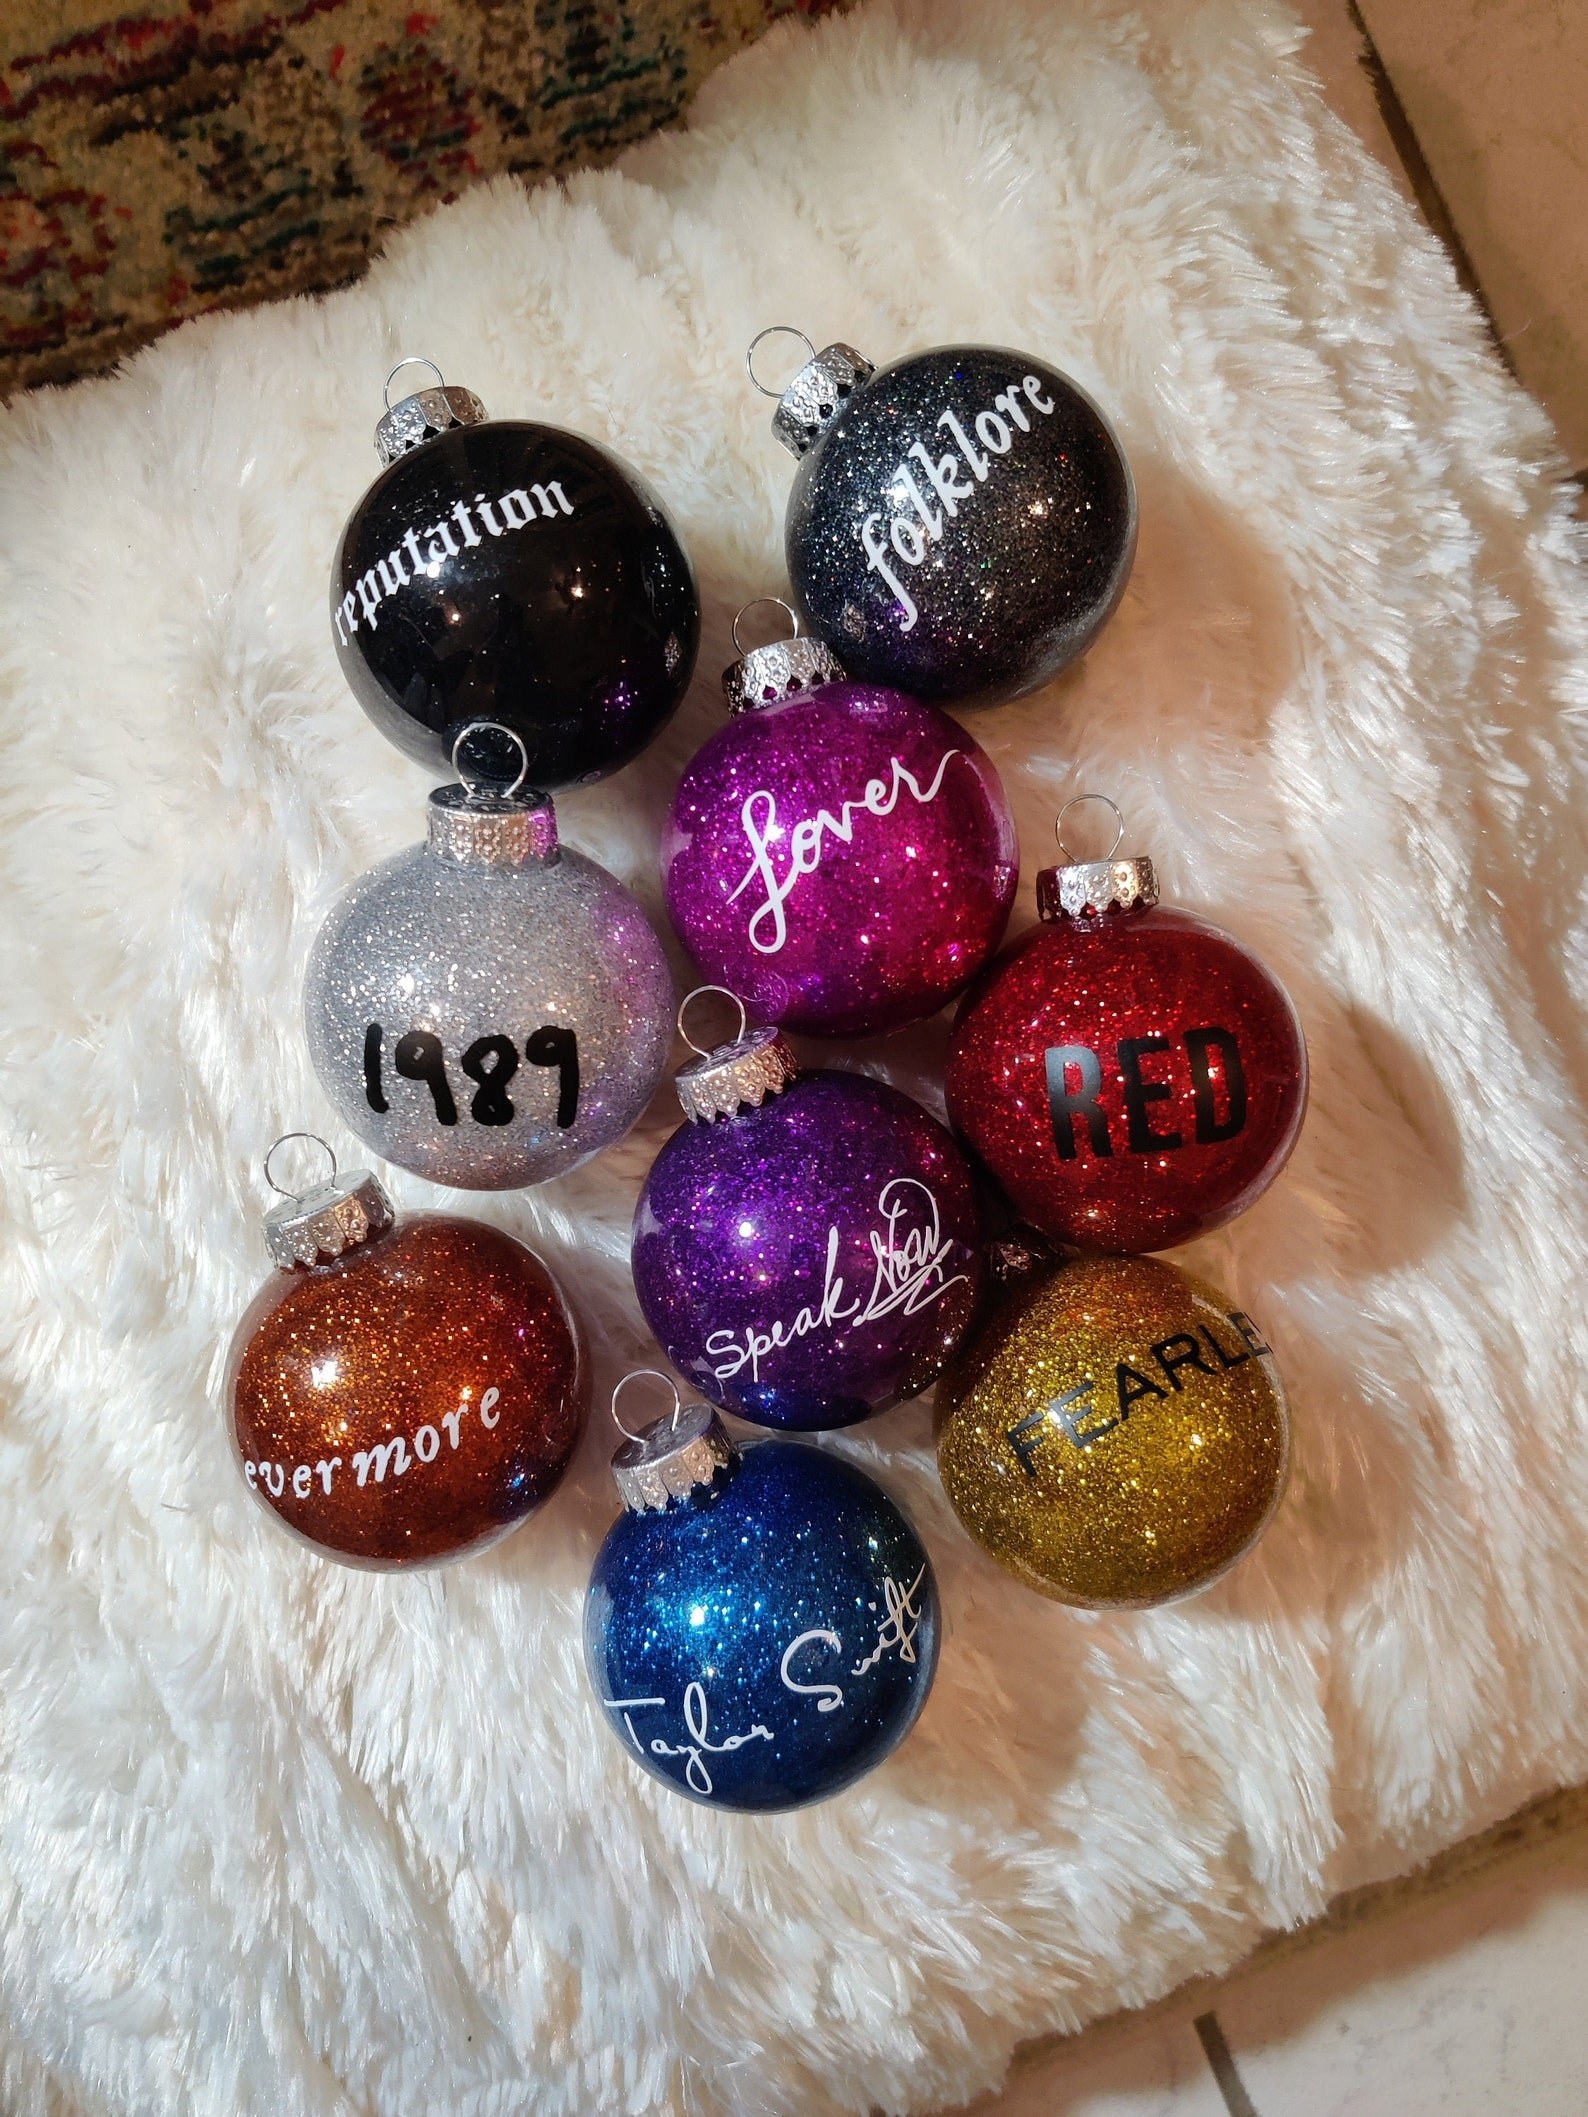 nine glittery ornaments with taylor swift album titles on each one